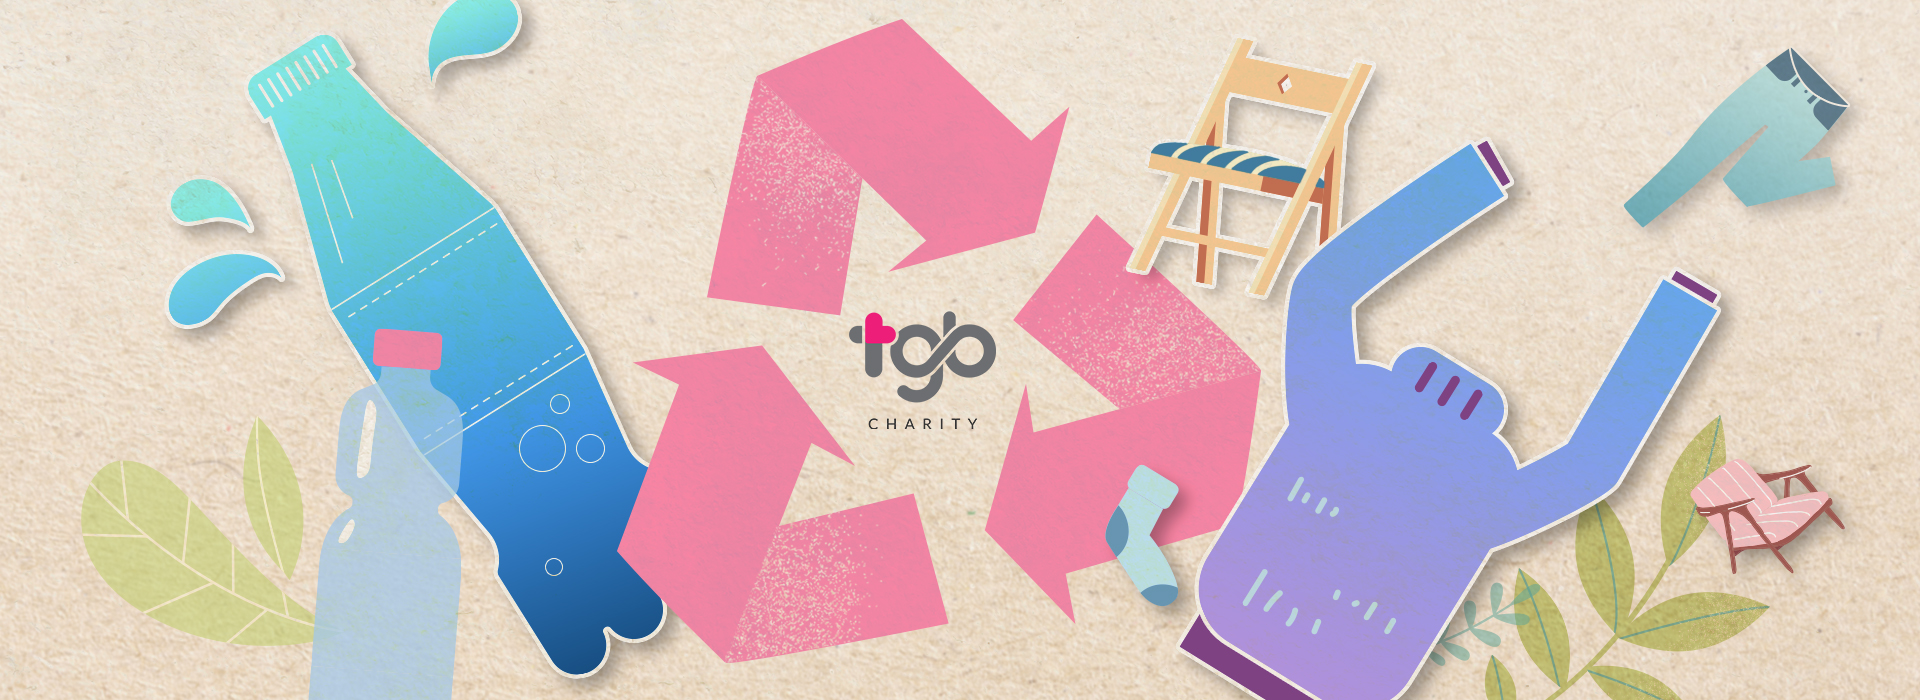 TGB Charity - From plastic bottles, clothes to furniture, you can deal with your everyday objects in a better way. Recycle. Reuse. Reduce. Close the loop. Buyback and Resell. 